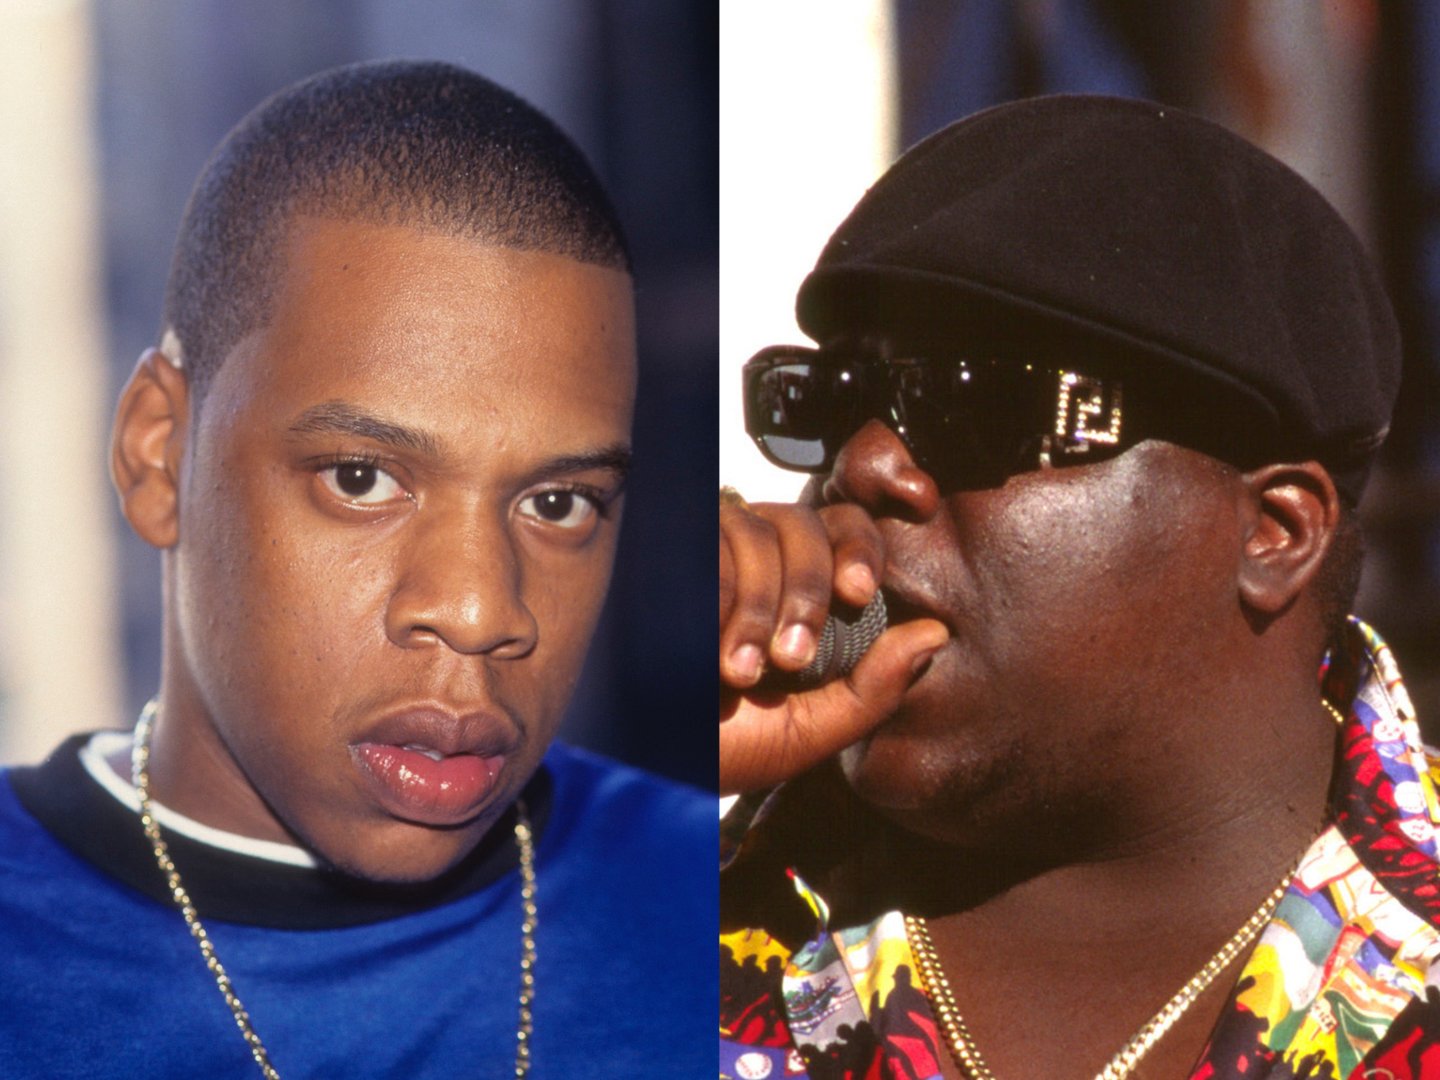 The Notorious B.I.G. and Jay-Z Were ‘Going at It’ While Recording ‘I Love the Dough’